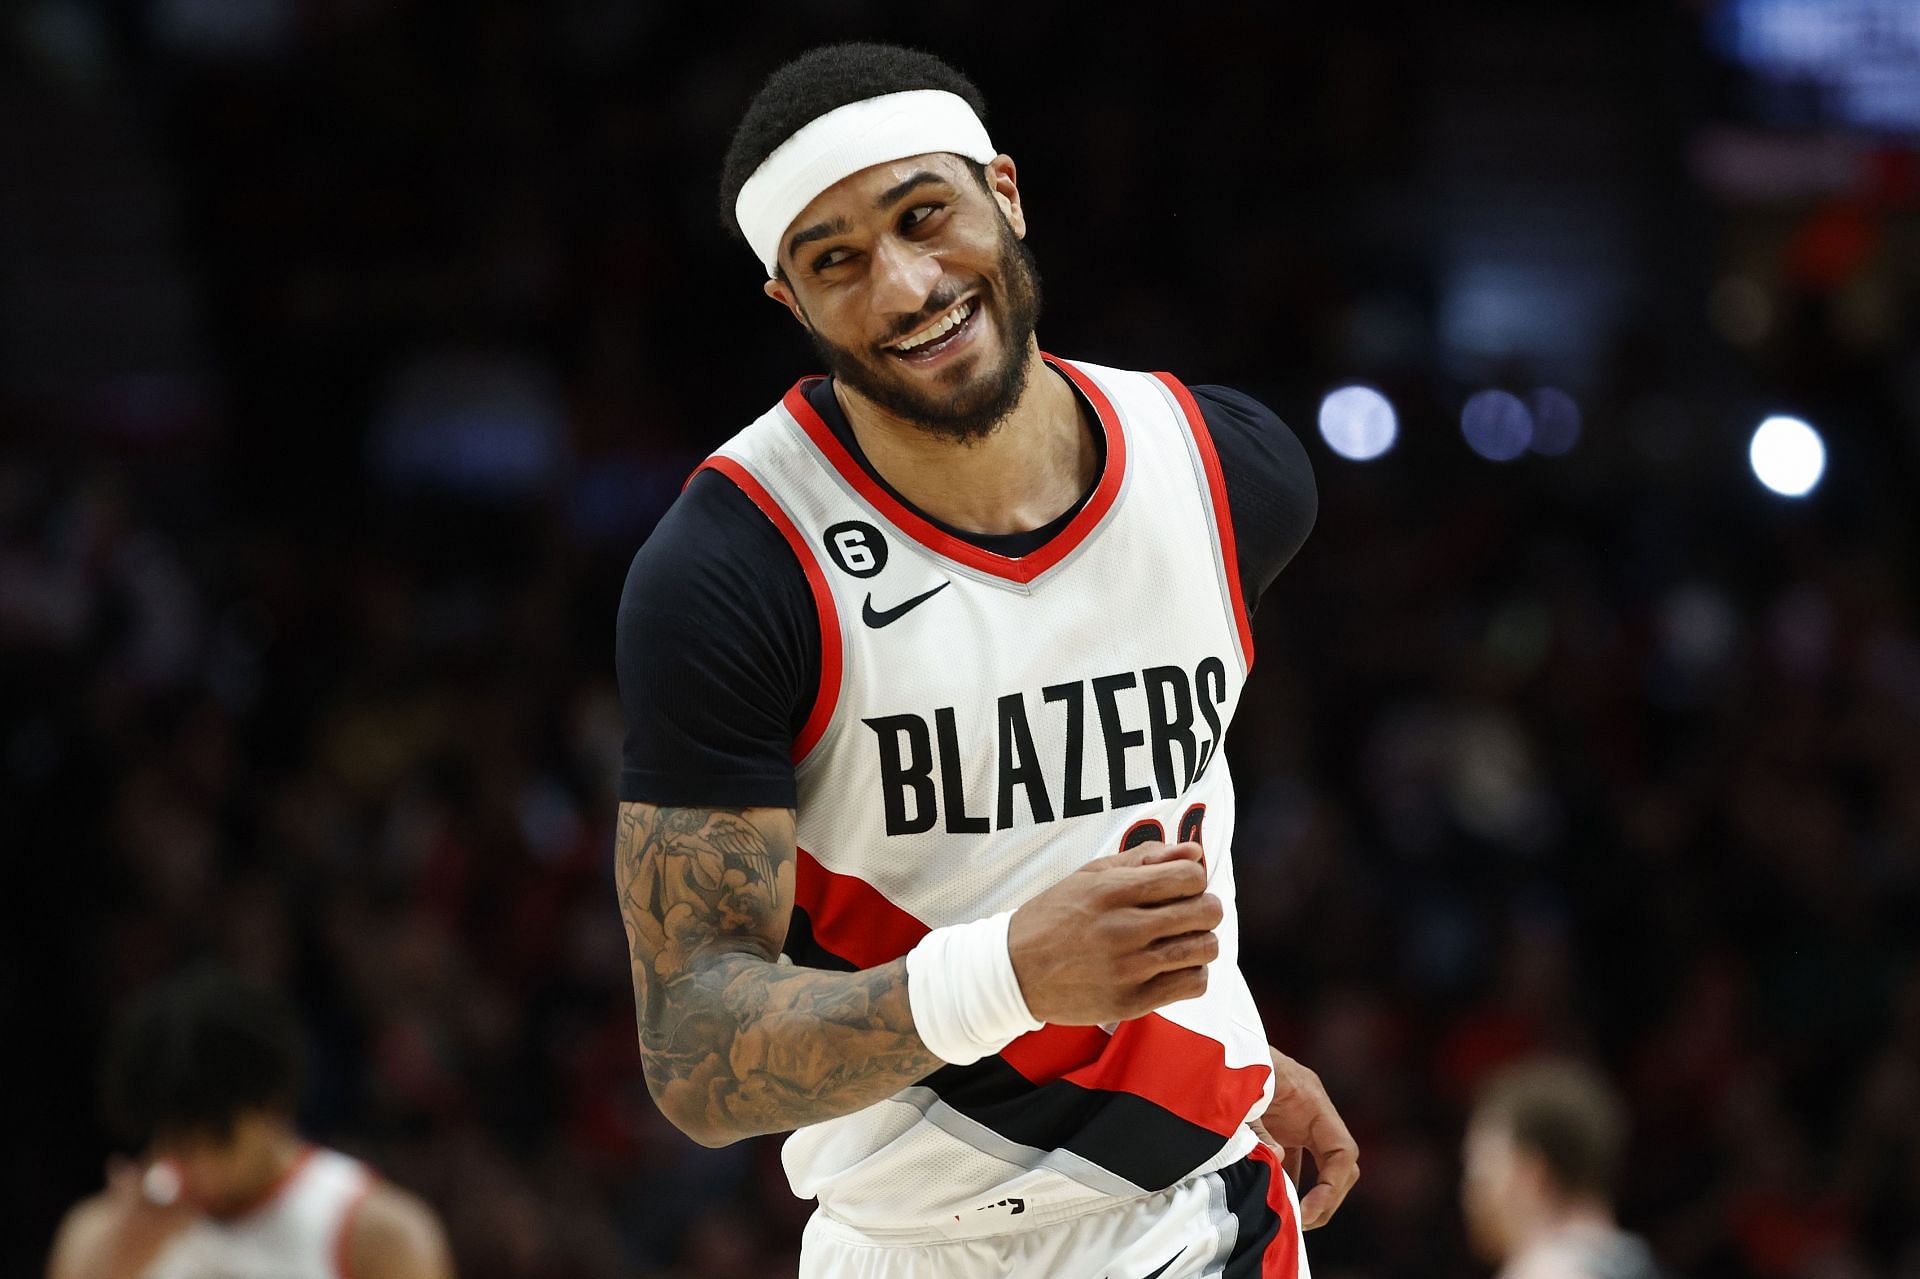 Guard Gary Payton II traded back to Warriors from Blazers